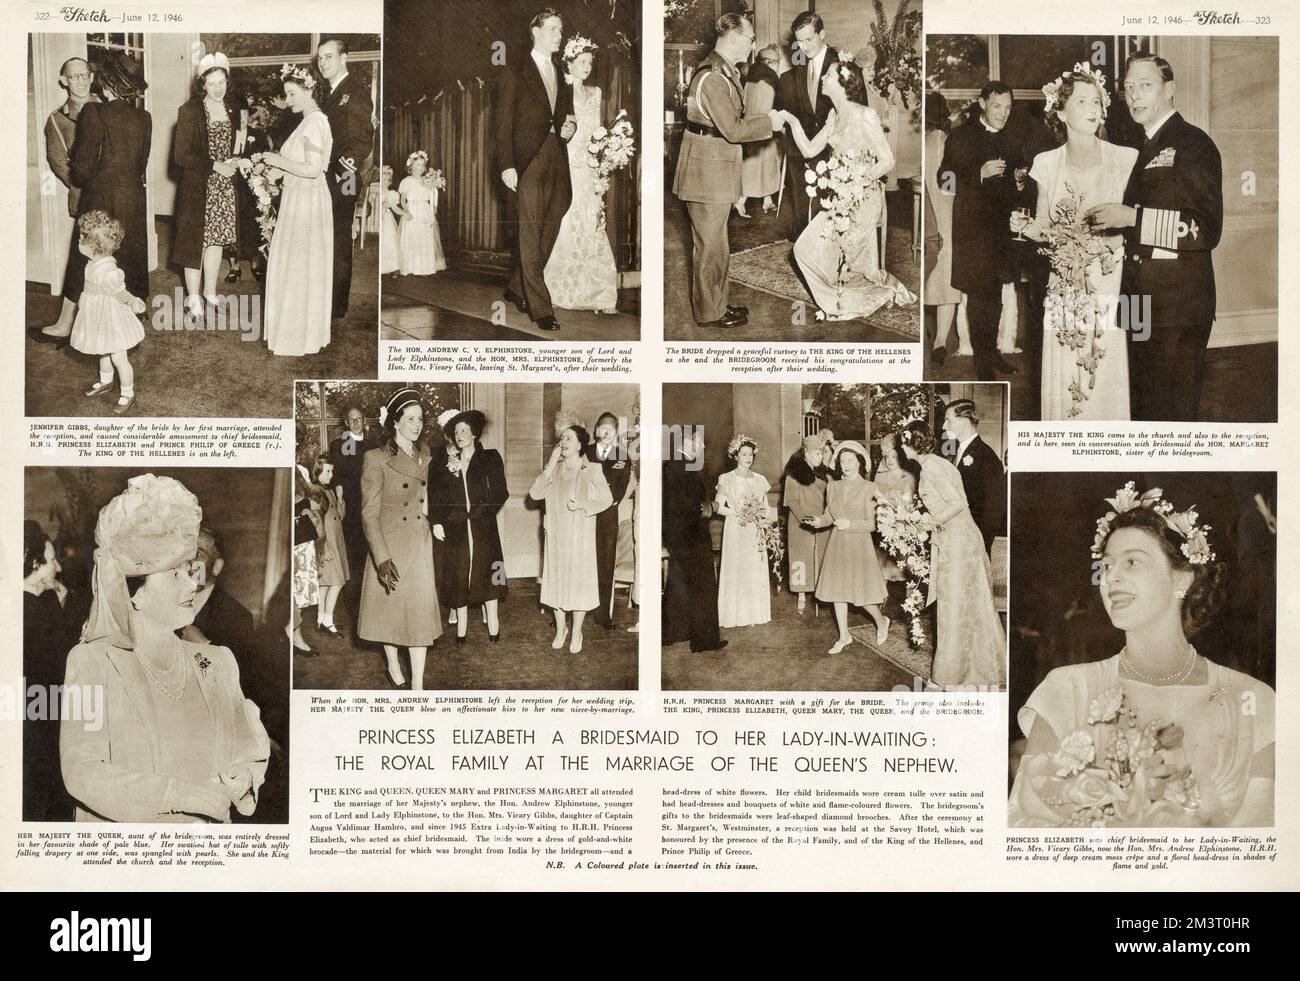 The wedding of Andrew Elphinstone, nephew of Queen Elizabeth to Mrs. Vicary Gibbs in June 1946, at which Princess Elizabeth (Queen Elizabeth II) was chief bridesmaid.  A notable picture in this spread is the Queen with Prince Philip of Greece, who would become her husband the following year. Also in attendance were the King and Queen, Queen Mary and the King of the Hellenes.     Date: 1946 Stock Photo